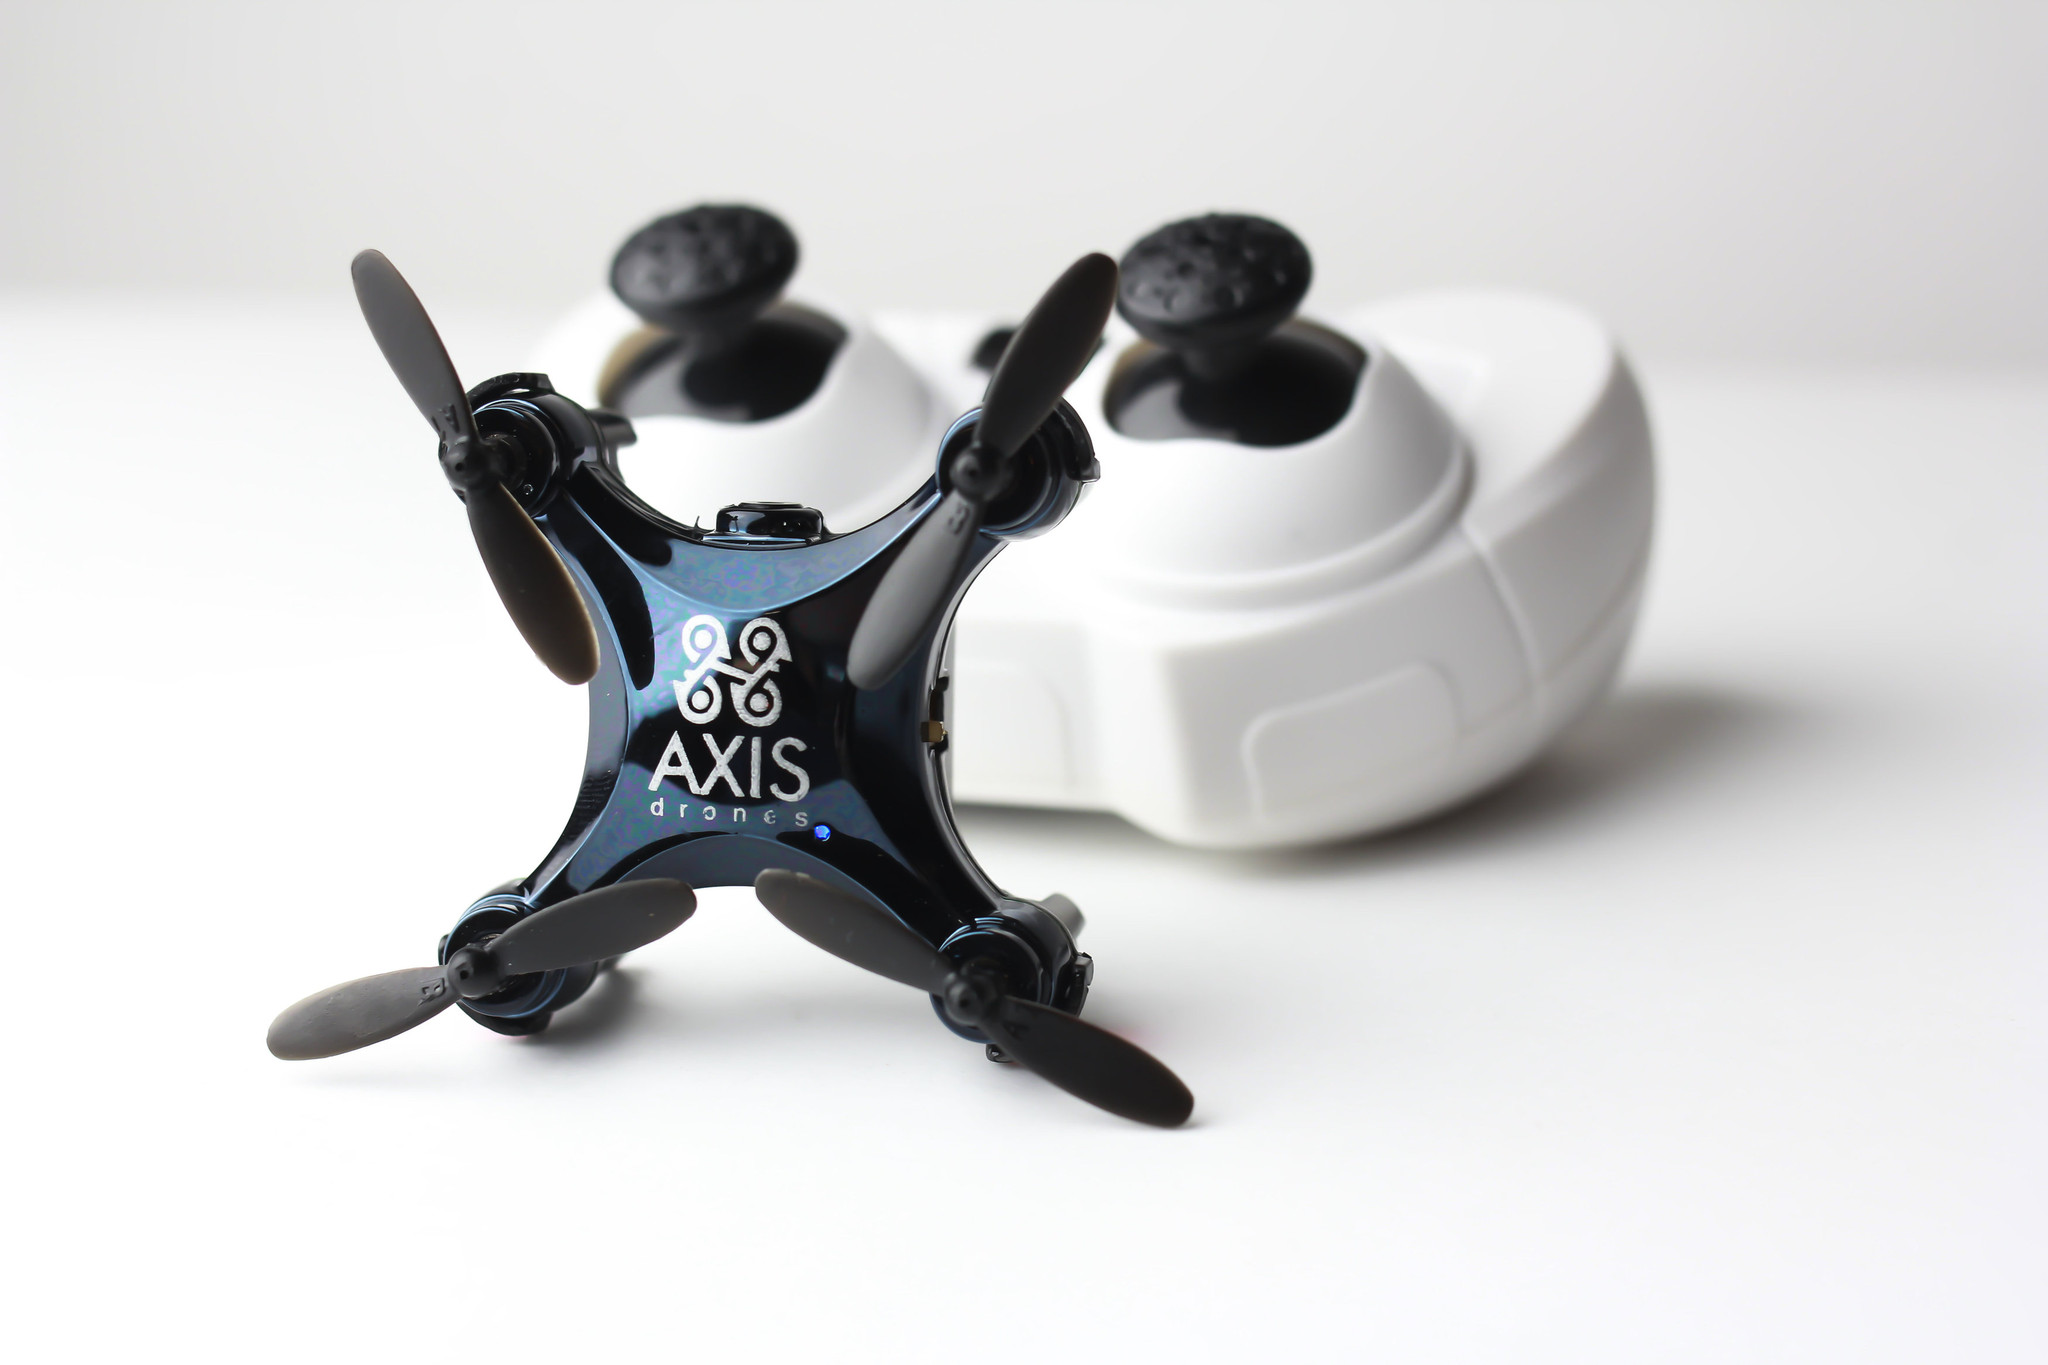 smallest camera-equipped drone 